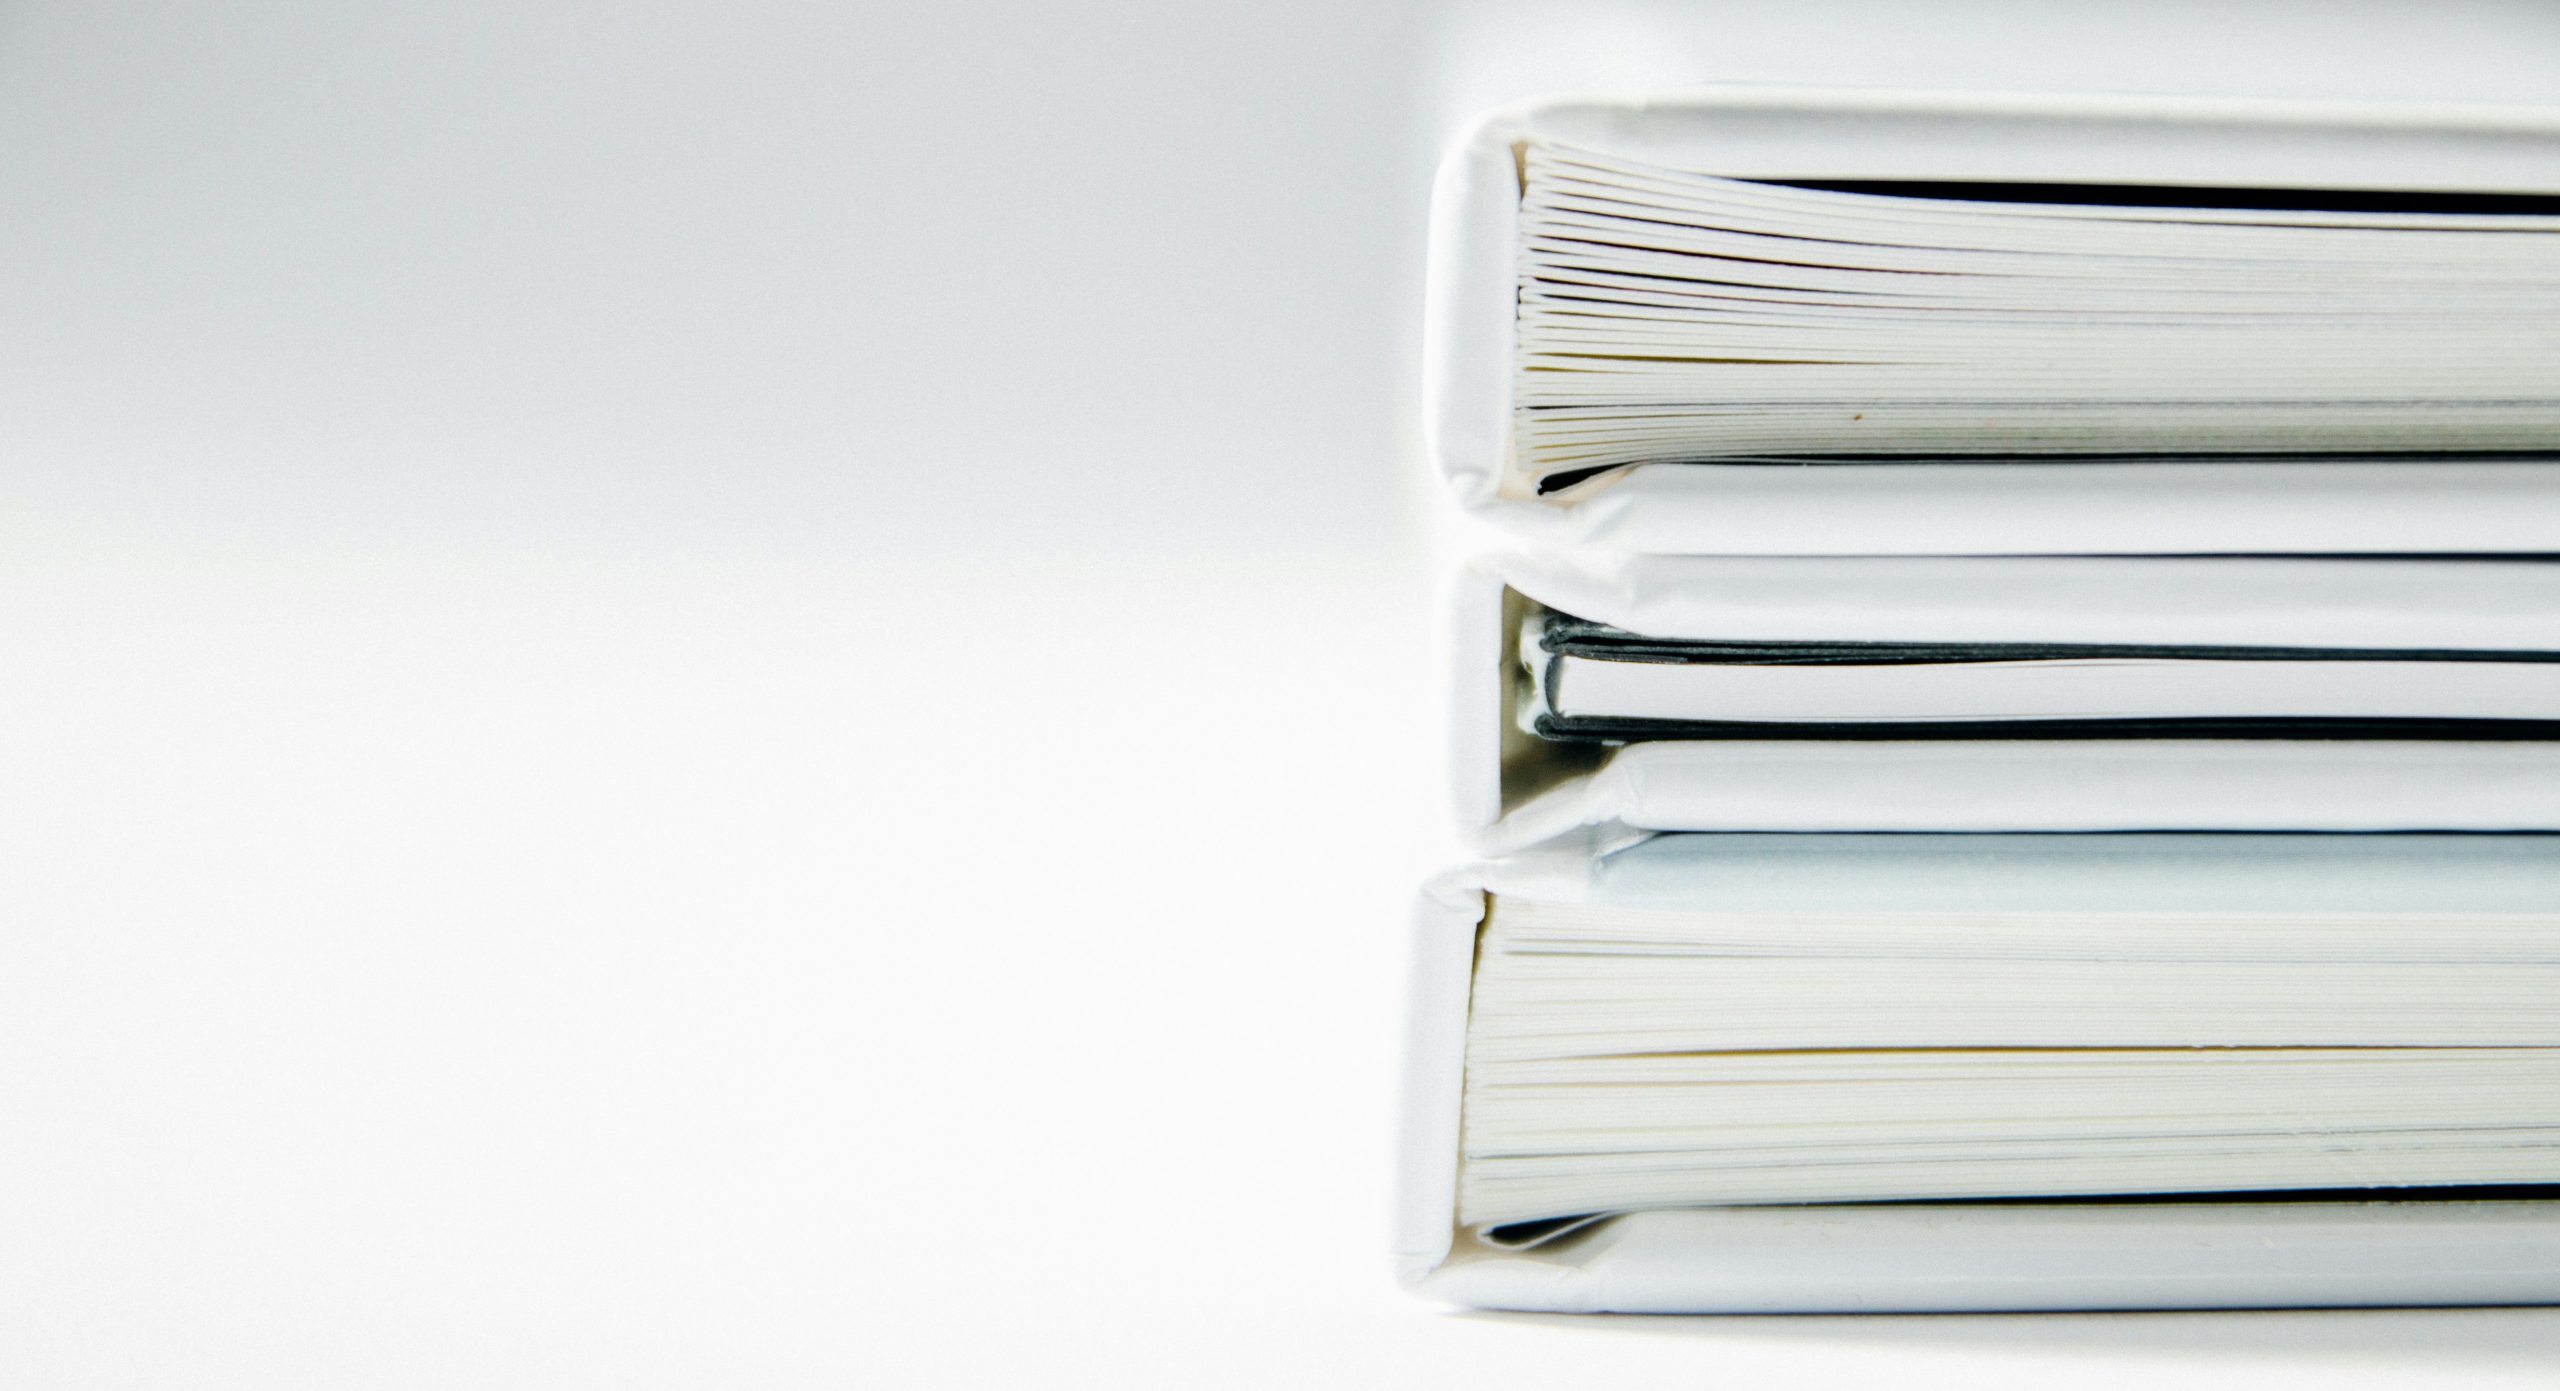 A partial view of a stack of 3 white binders filled with paper. White and grey background.